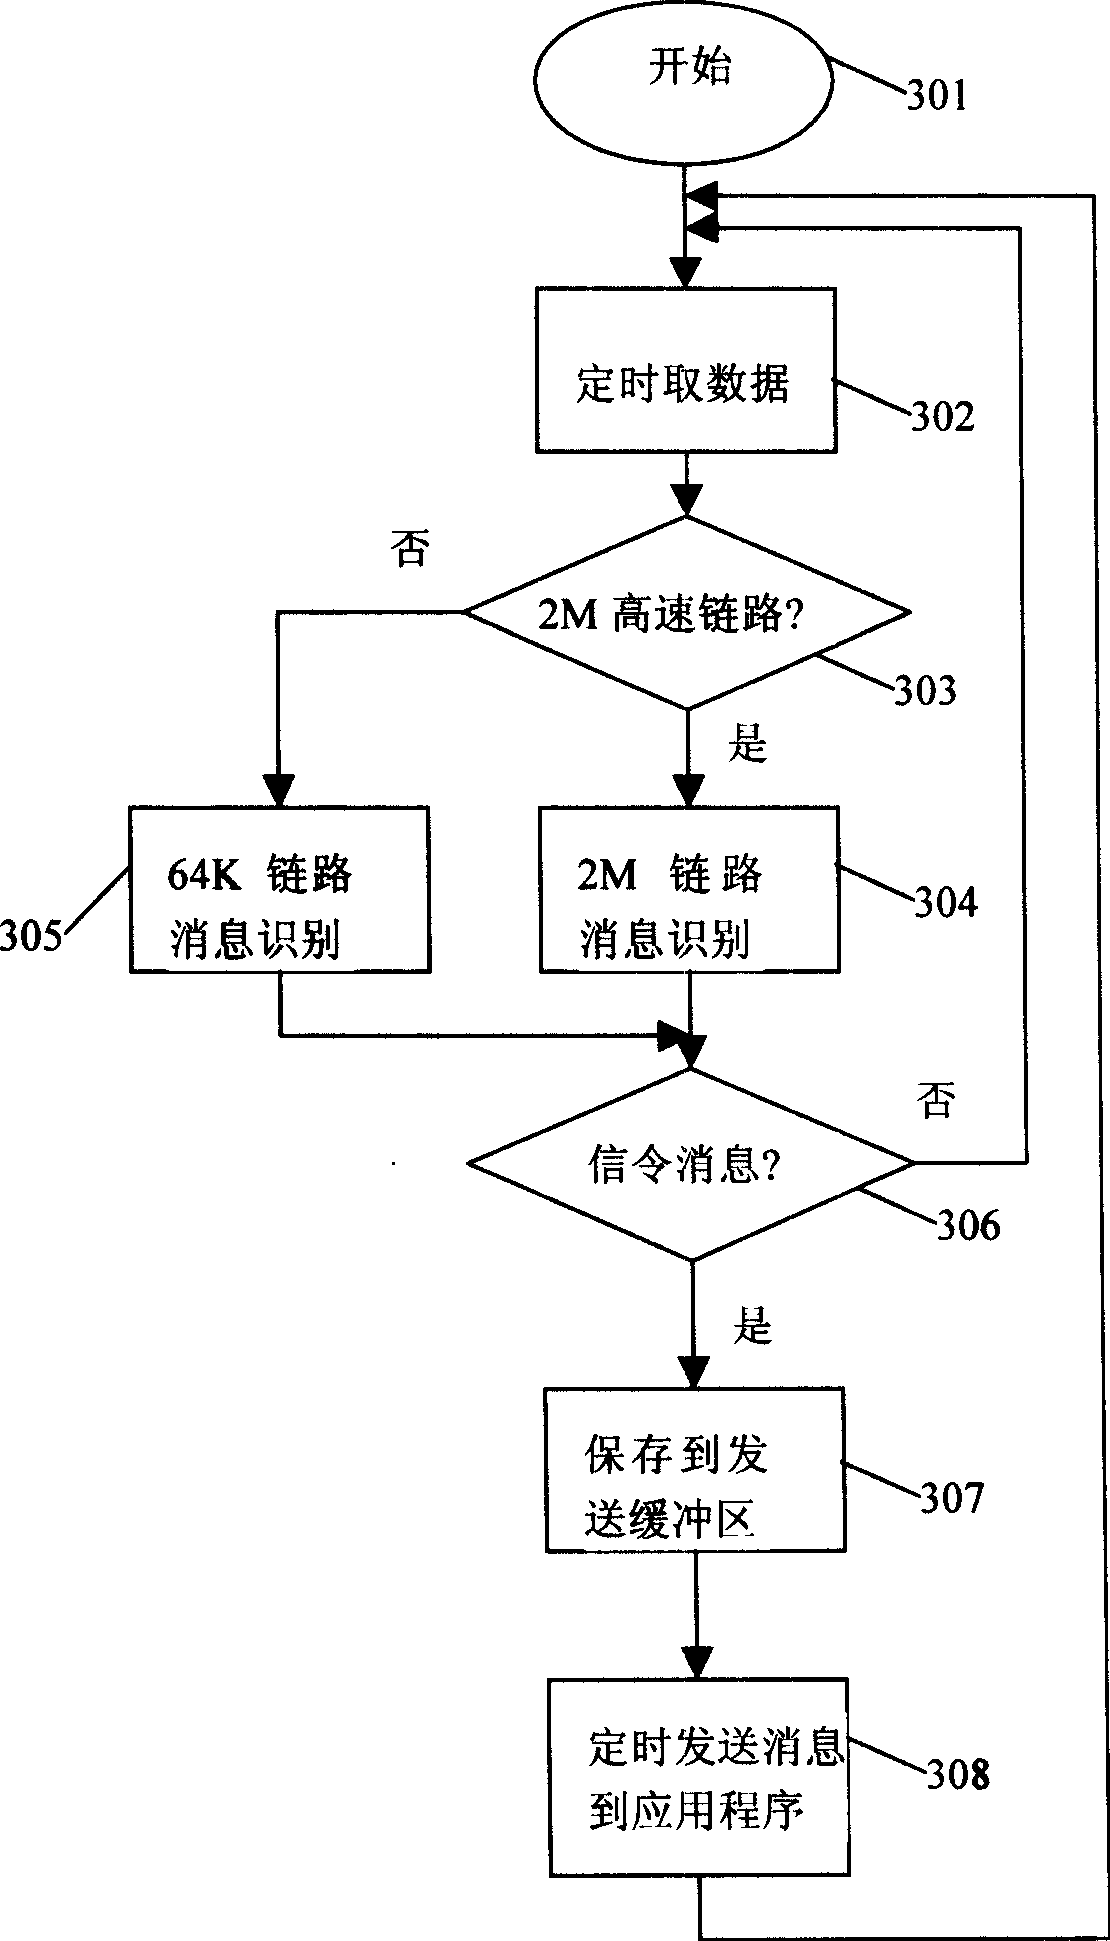 A call miss monitoring system and its method